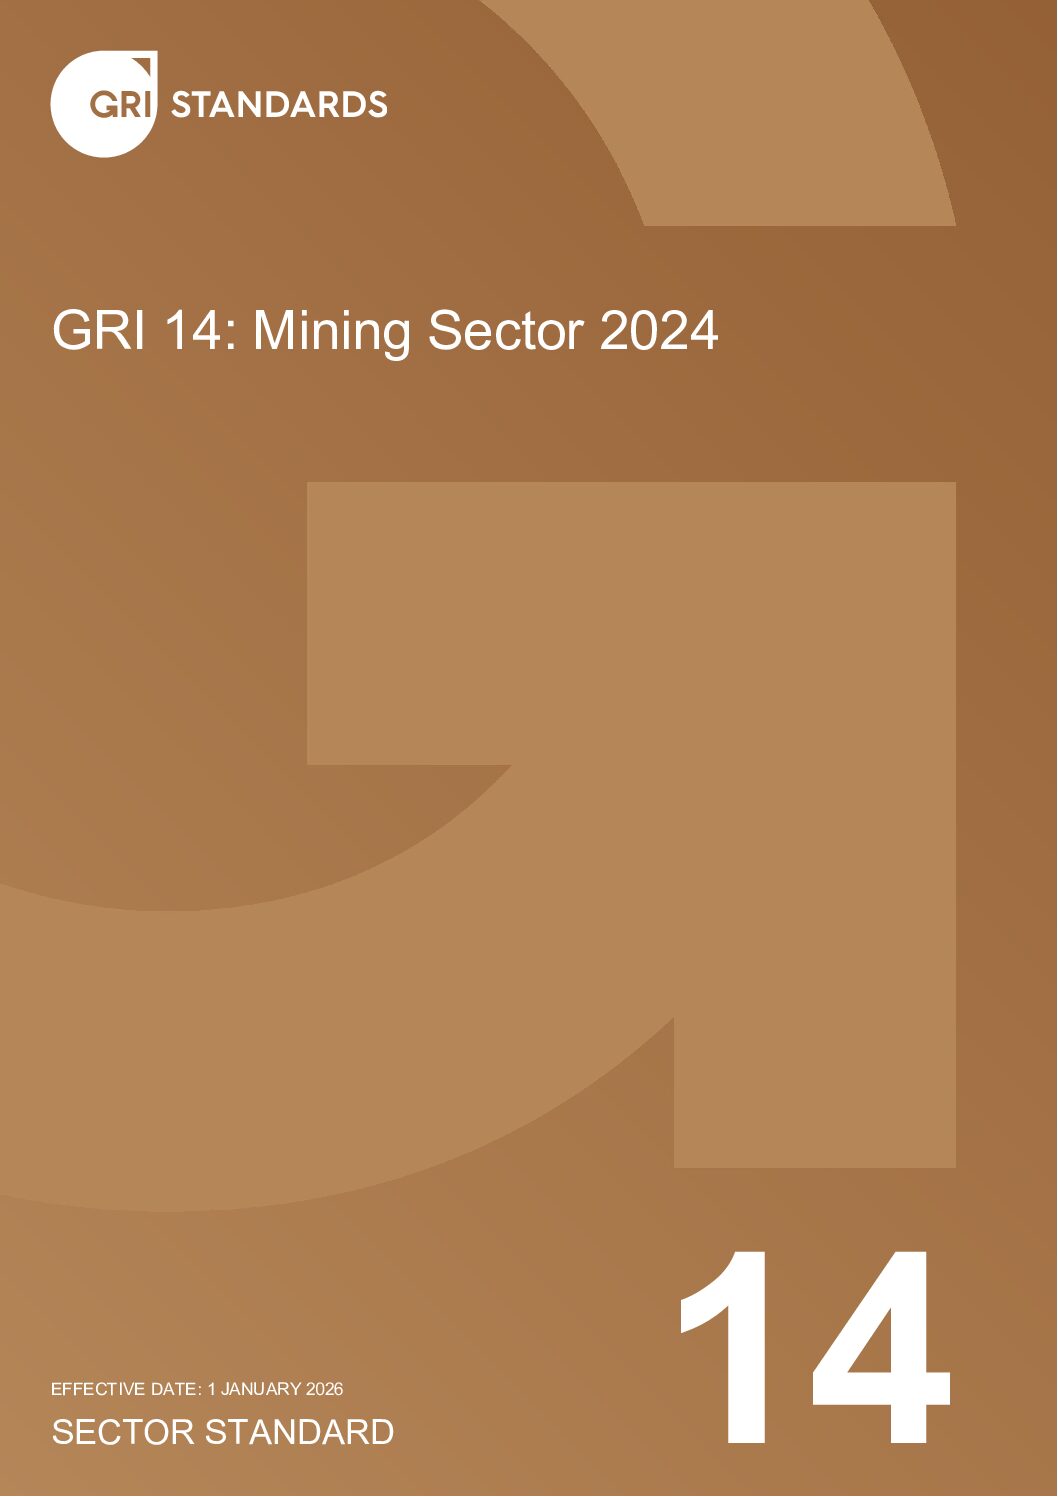 GRI 14: Mining Sector 2024 – A Quick Overview